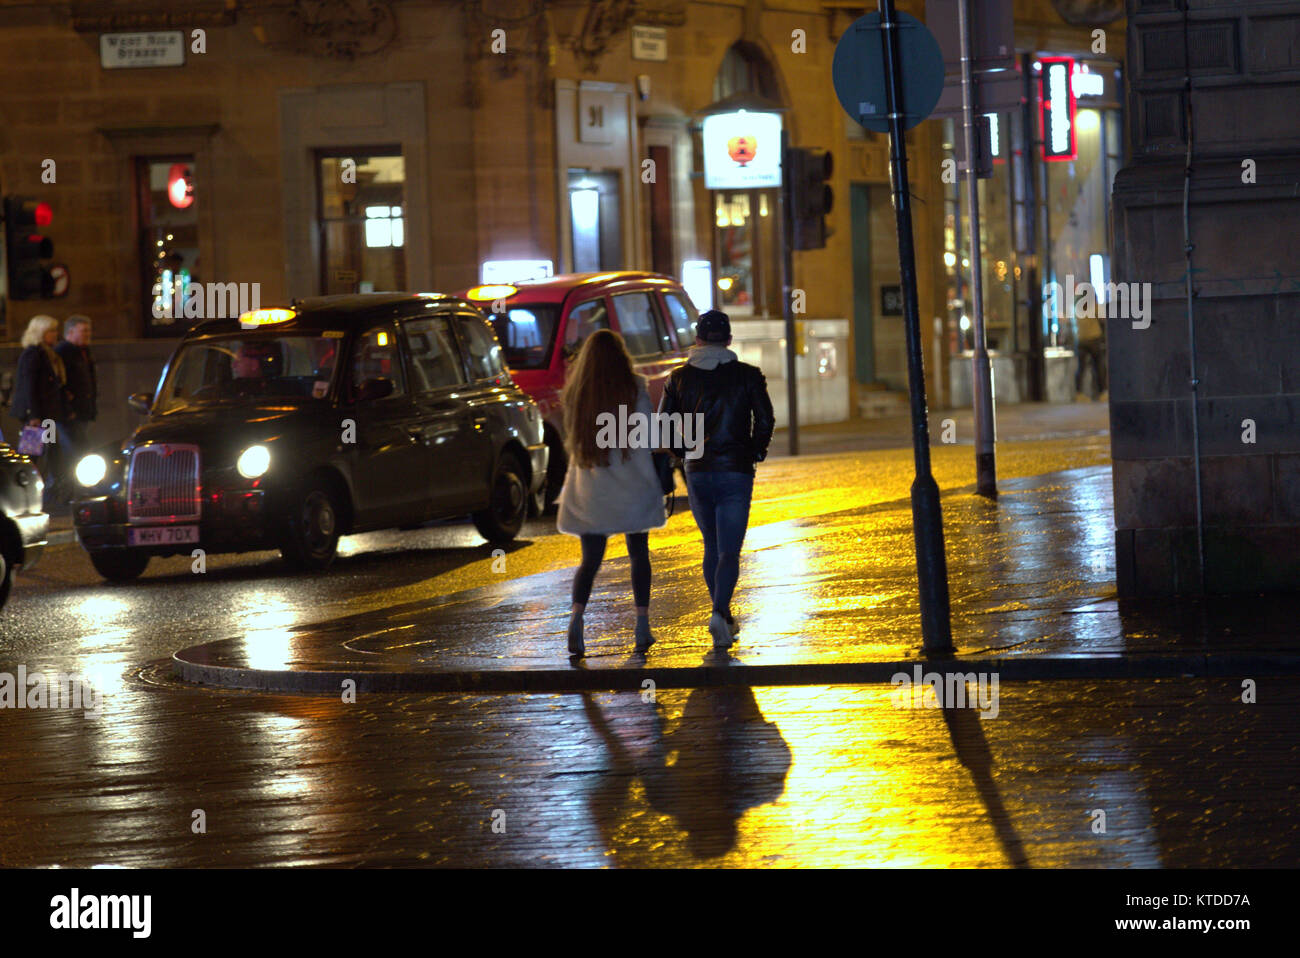 gritty urban night time Glasgow wet street life young couple a boy and a girl walking on a night out date late at night with taxi taxis Stock Photo